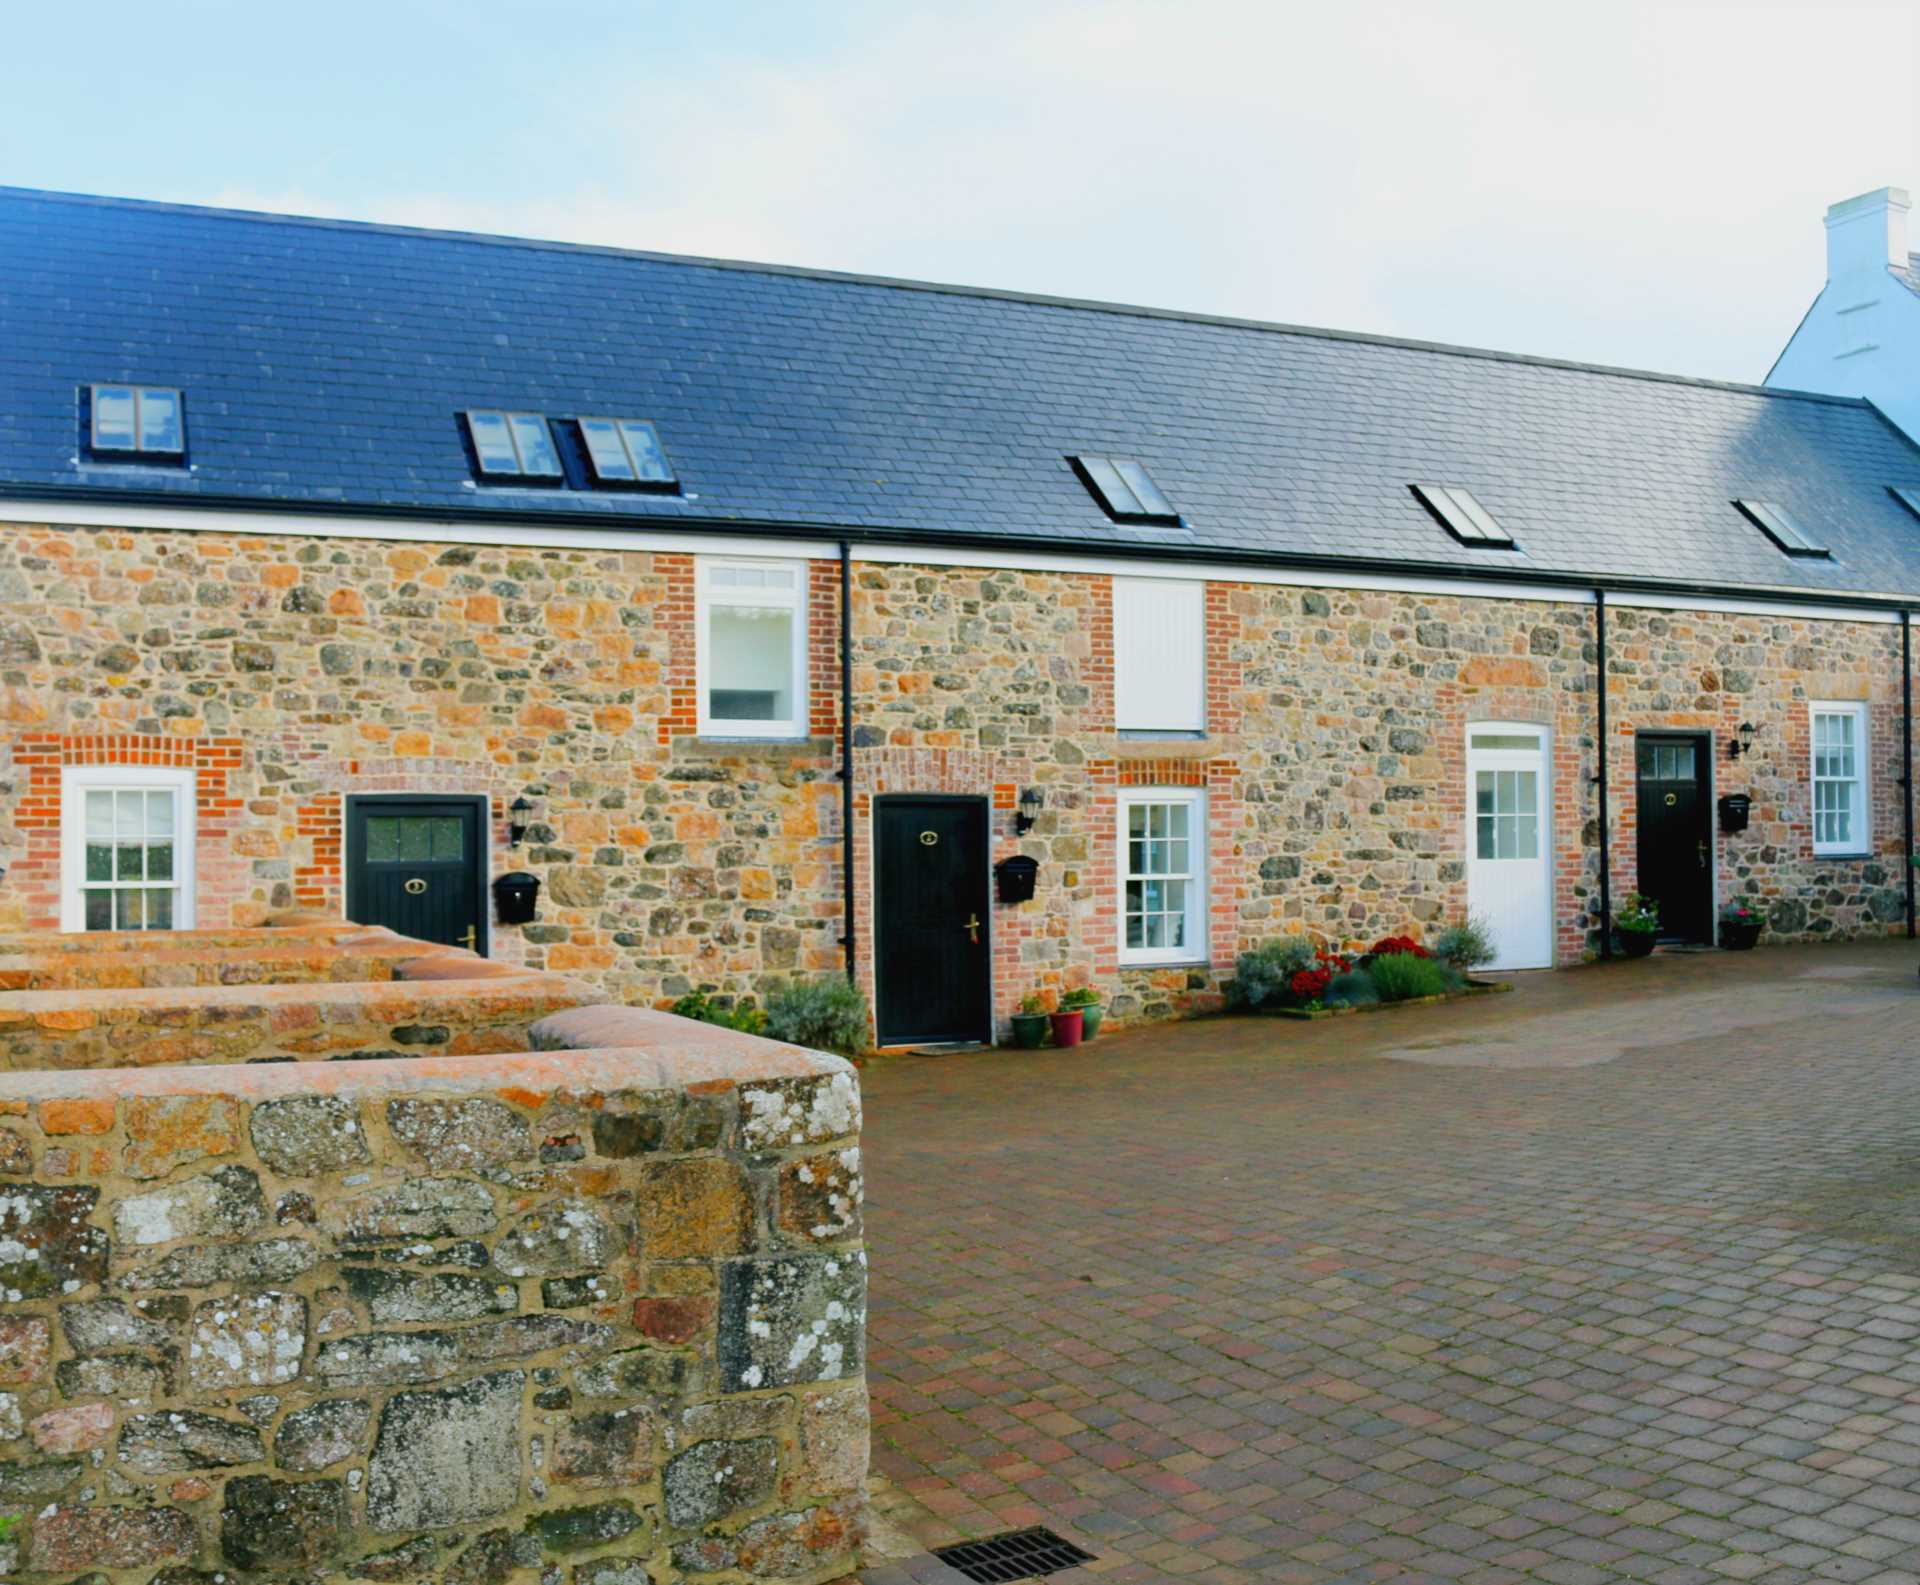 Rental - 1 & 2 bedroom non qualified rural cottages ALL LET NOW, Image 1